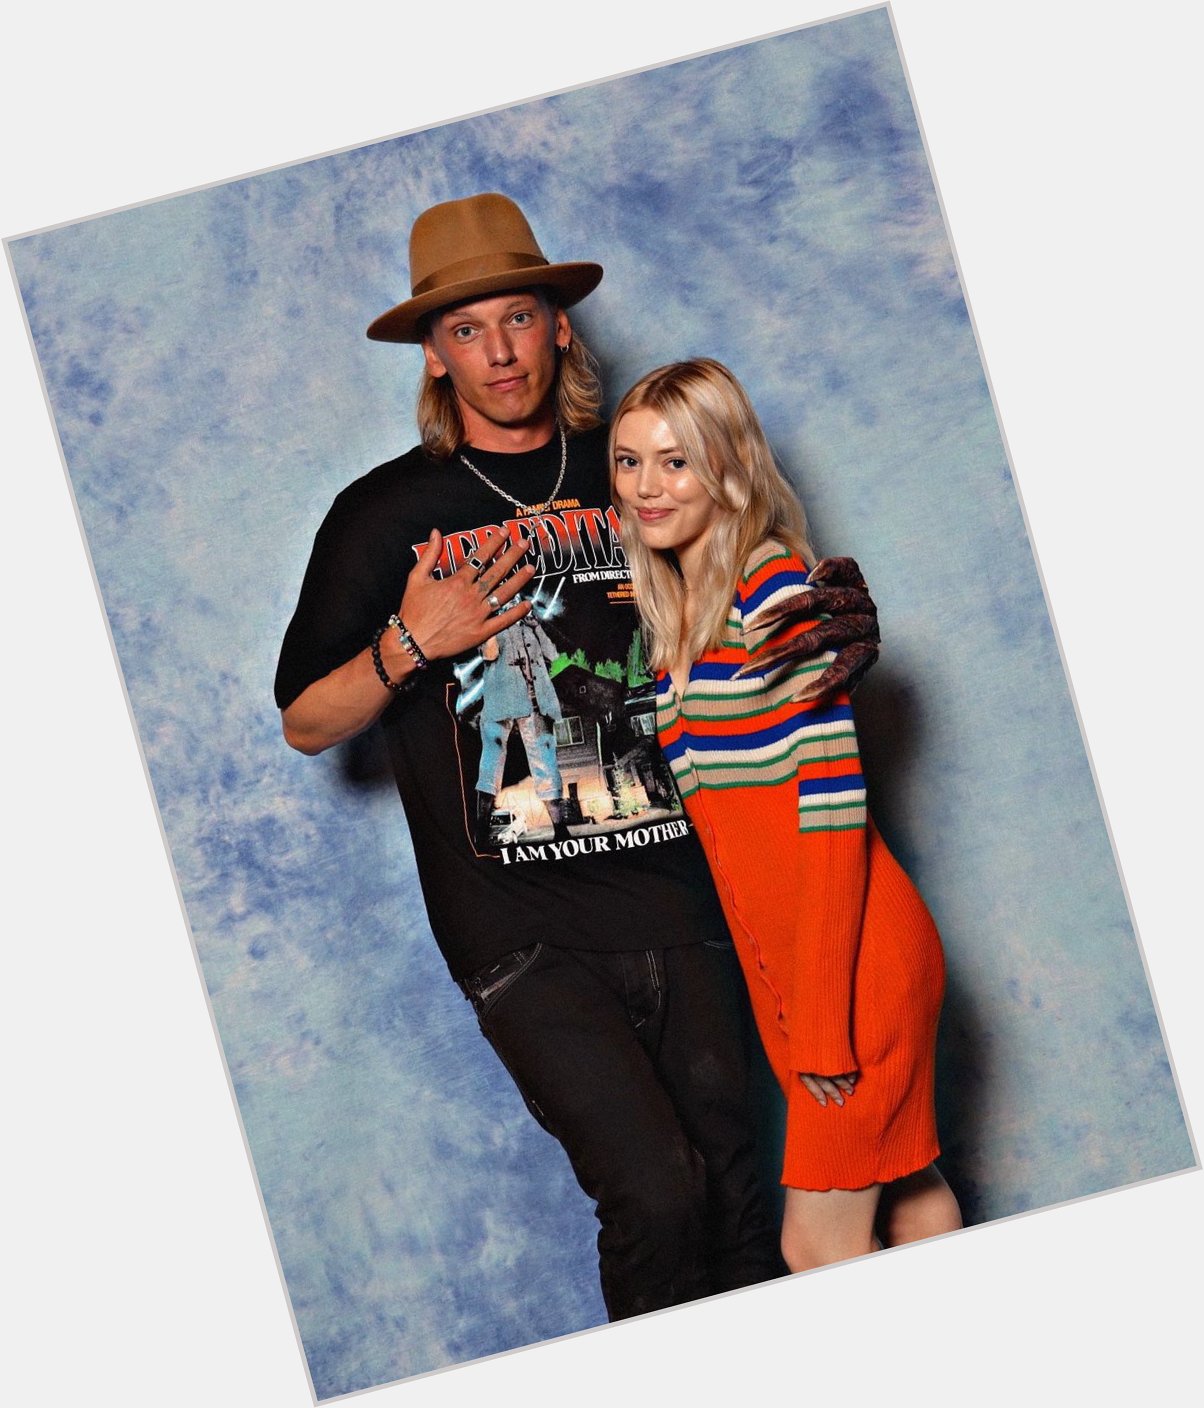 Grace Van Dien and Jamie Campbell Bower during Fan Expo Canada back in August! Happy birthday Jamie! 